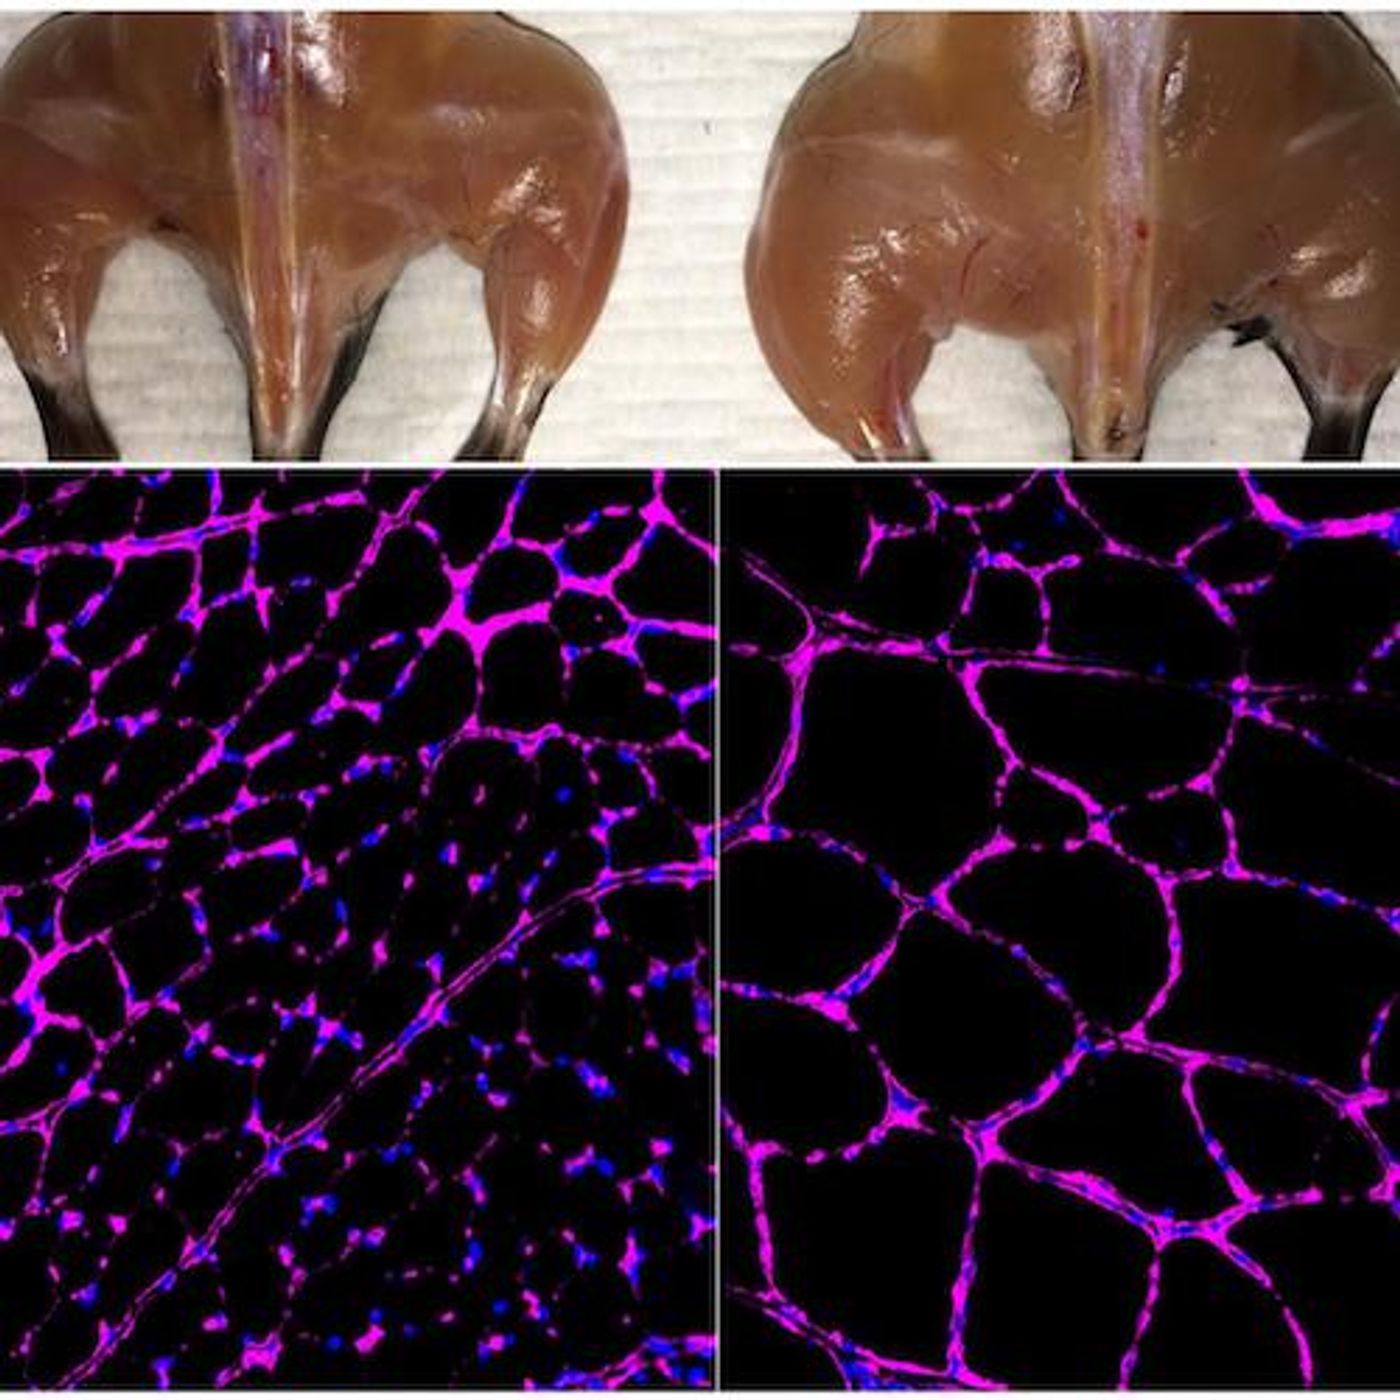 The Belmonte lab's advanced in vivo Cas9-based epigenetic gene activation system enhances skeletal muscle mass (top) and fiber size growth (bottom) in a treated mouse (right) compared with an independent control (left). The fluorescent microscopy images at bottom show purple staining of the laminin glycoprotein in tibialis anterior muscle fibers. / Credit: Salk Institute